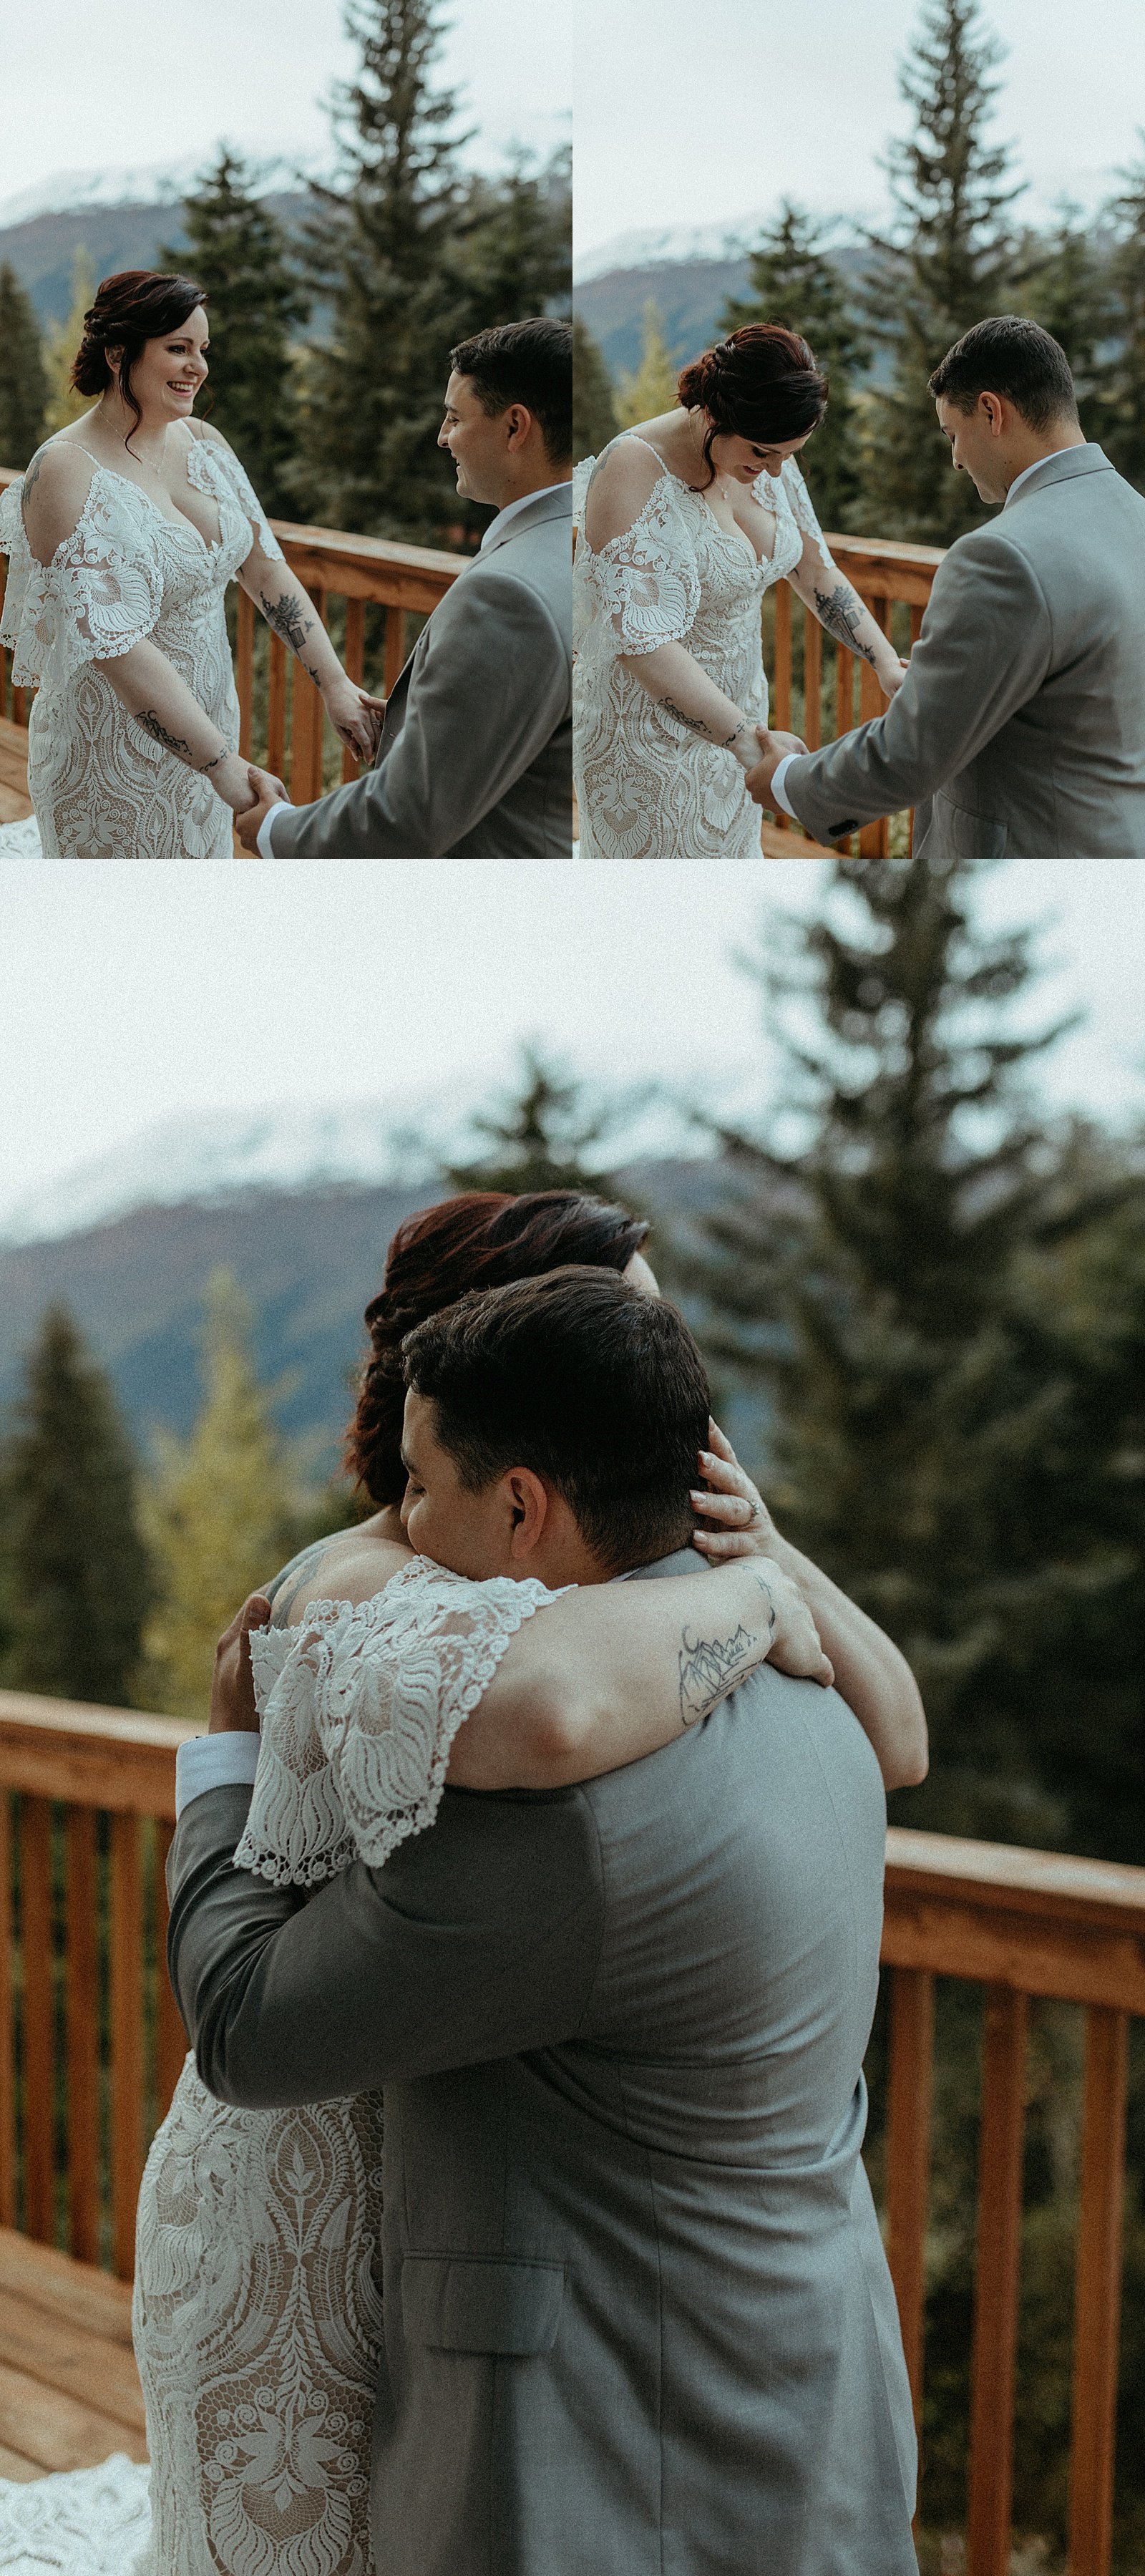  Bride and groom embracing before their ceremony for Alaskan Elopement in the forest 